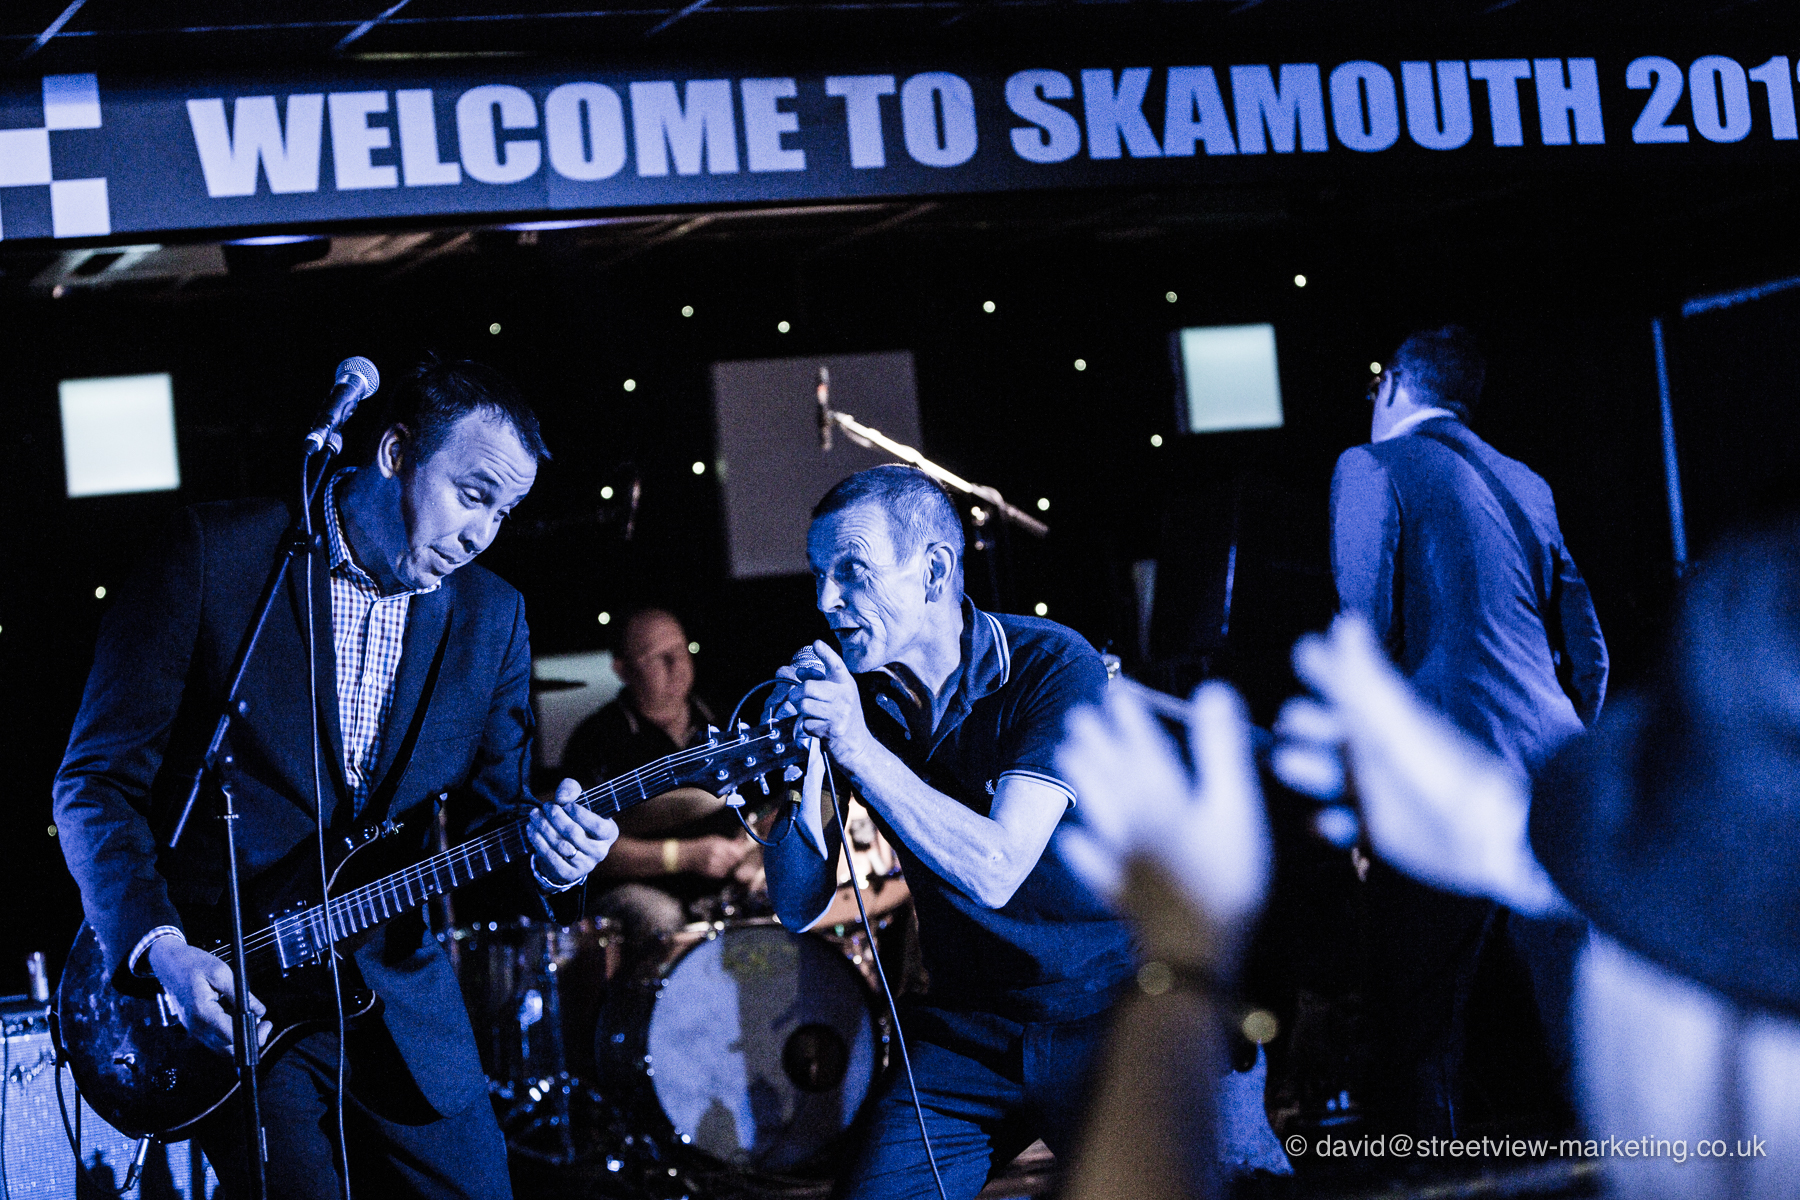 1st skamouth event